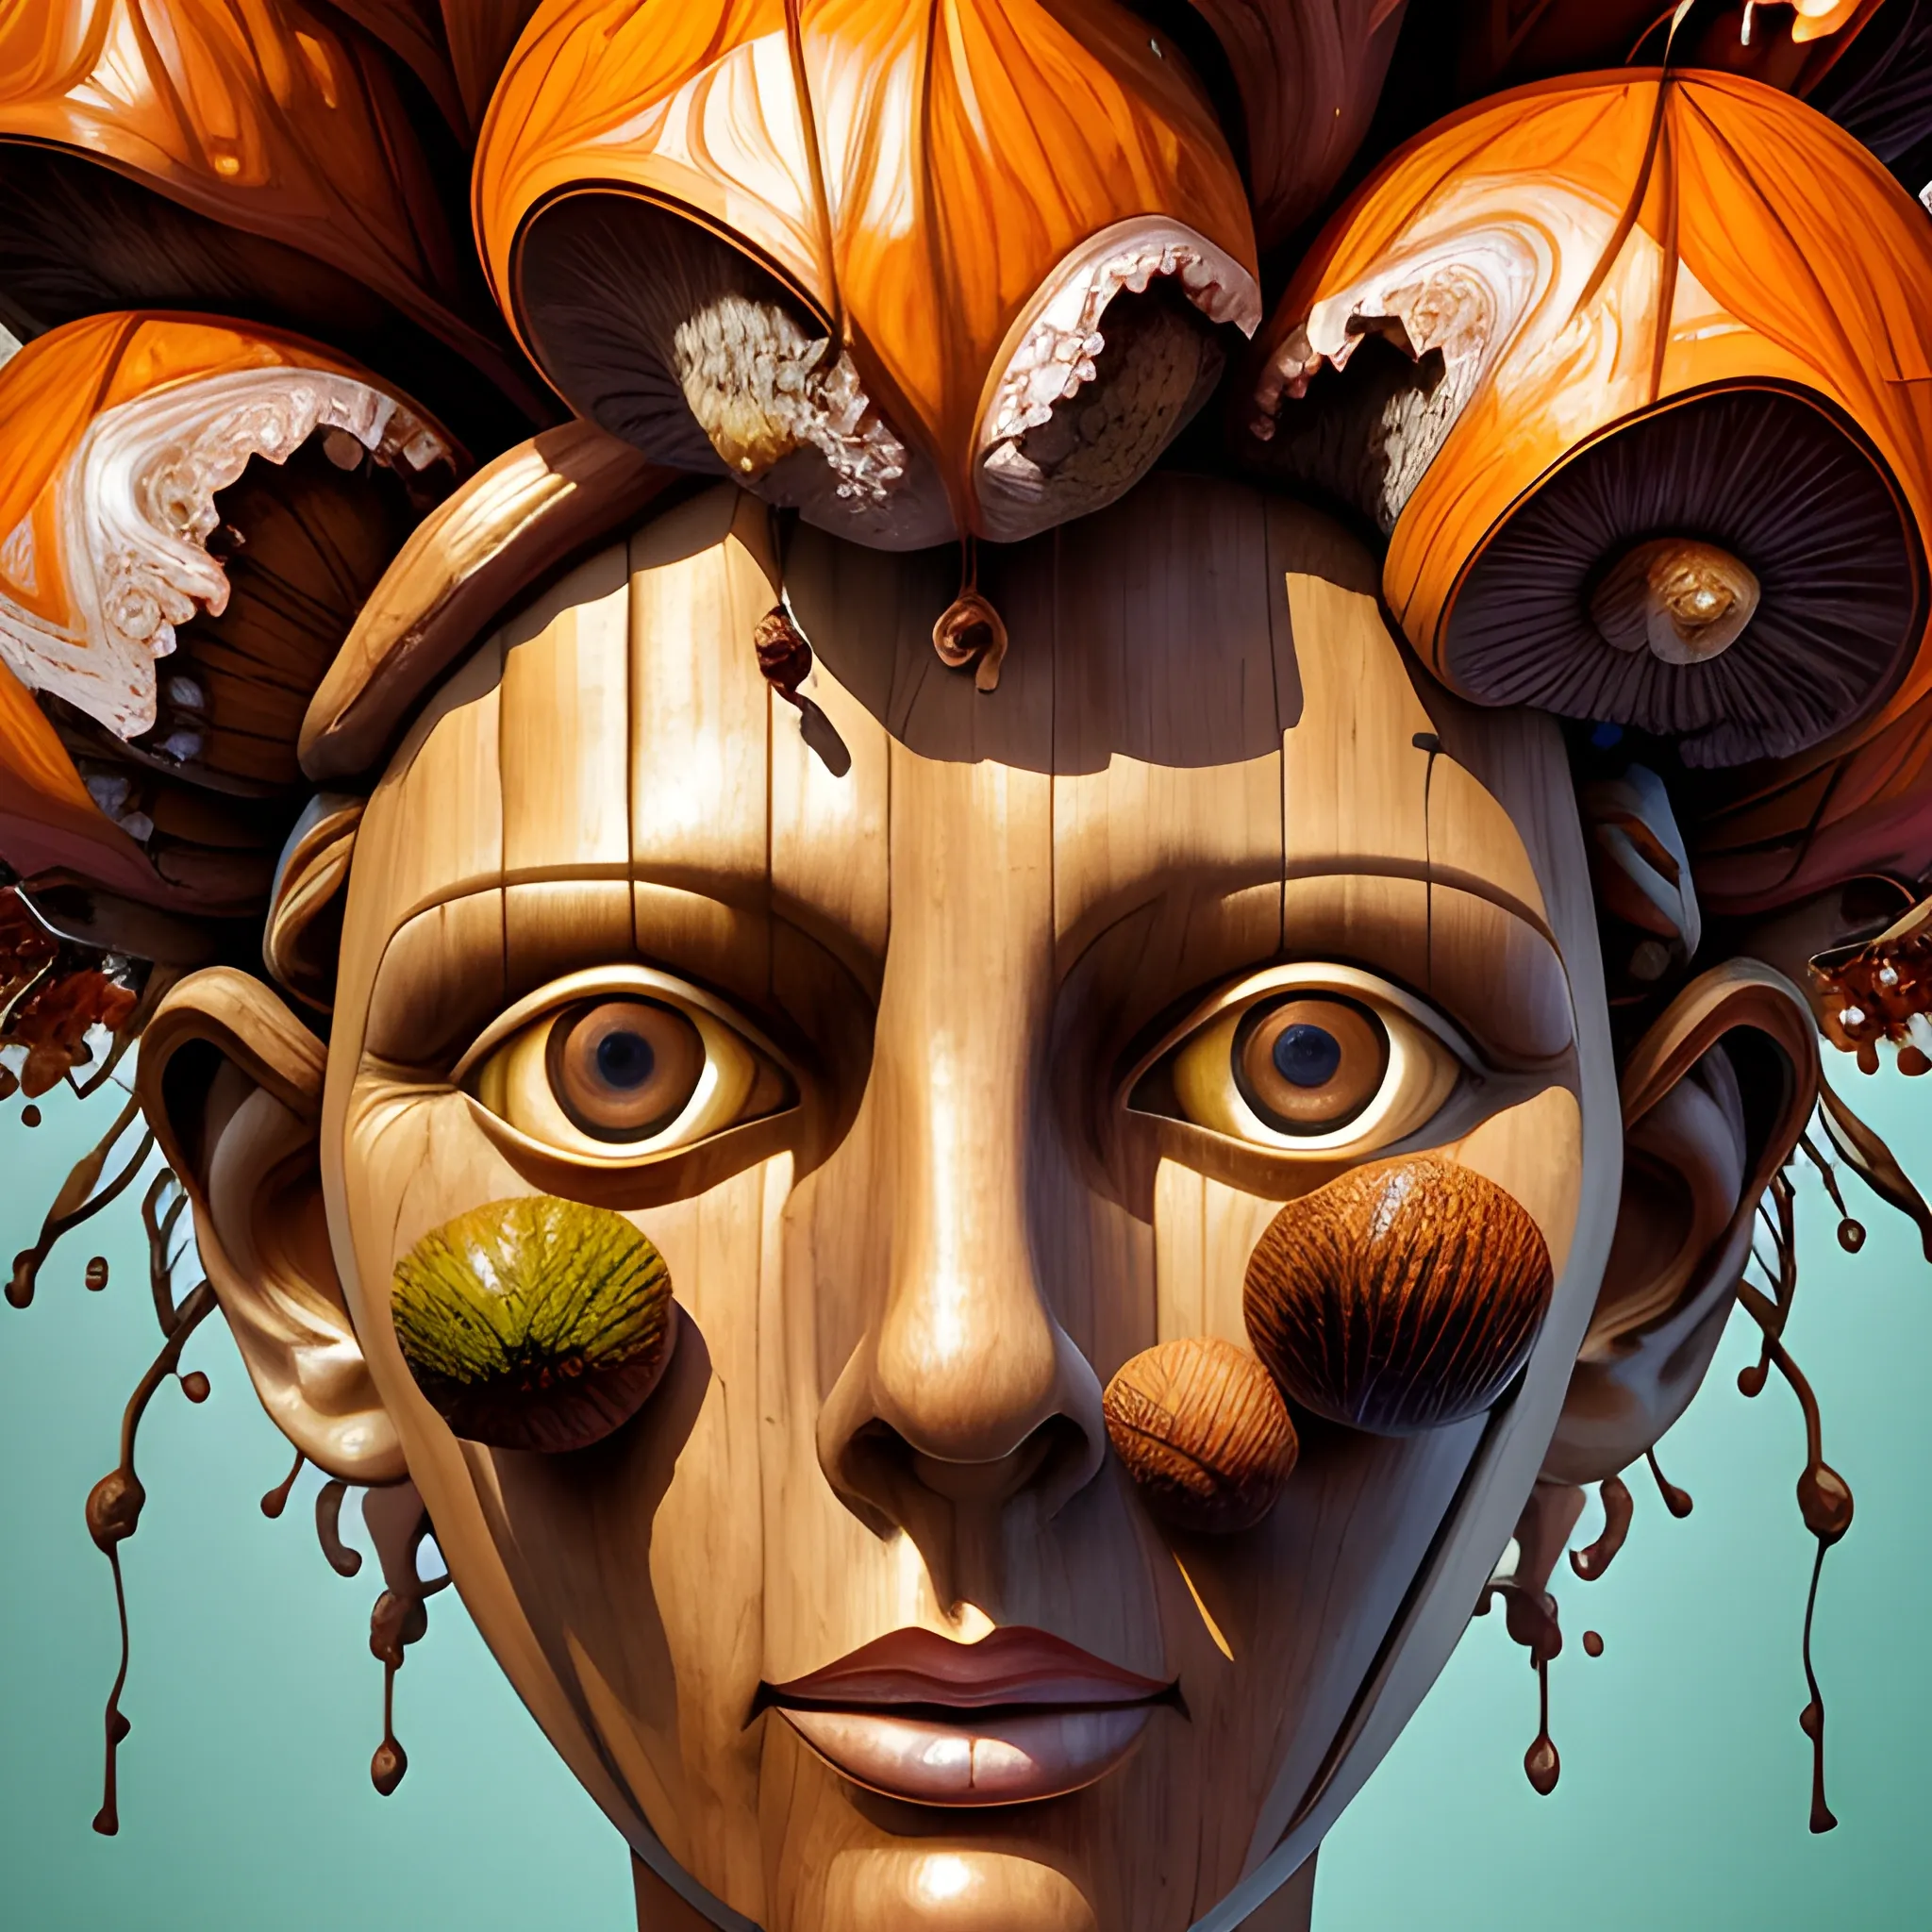 create a wood statue of a female human face to look like many crazy chestnuts, close up, saturated colors, surrealism, chaotic background many chestnuts and chestnut leaves floating around  3D, Trippy, eerie atmosphere, close up, illustration, angular perspective, Oil Painting, Water Color